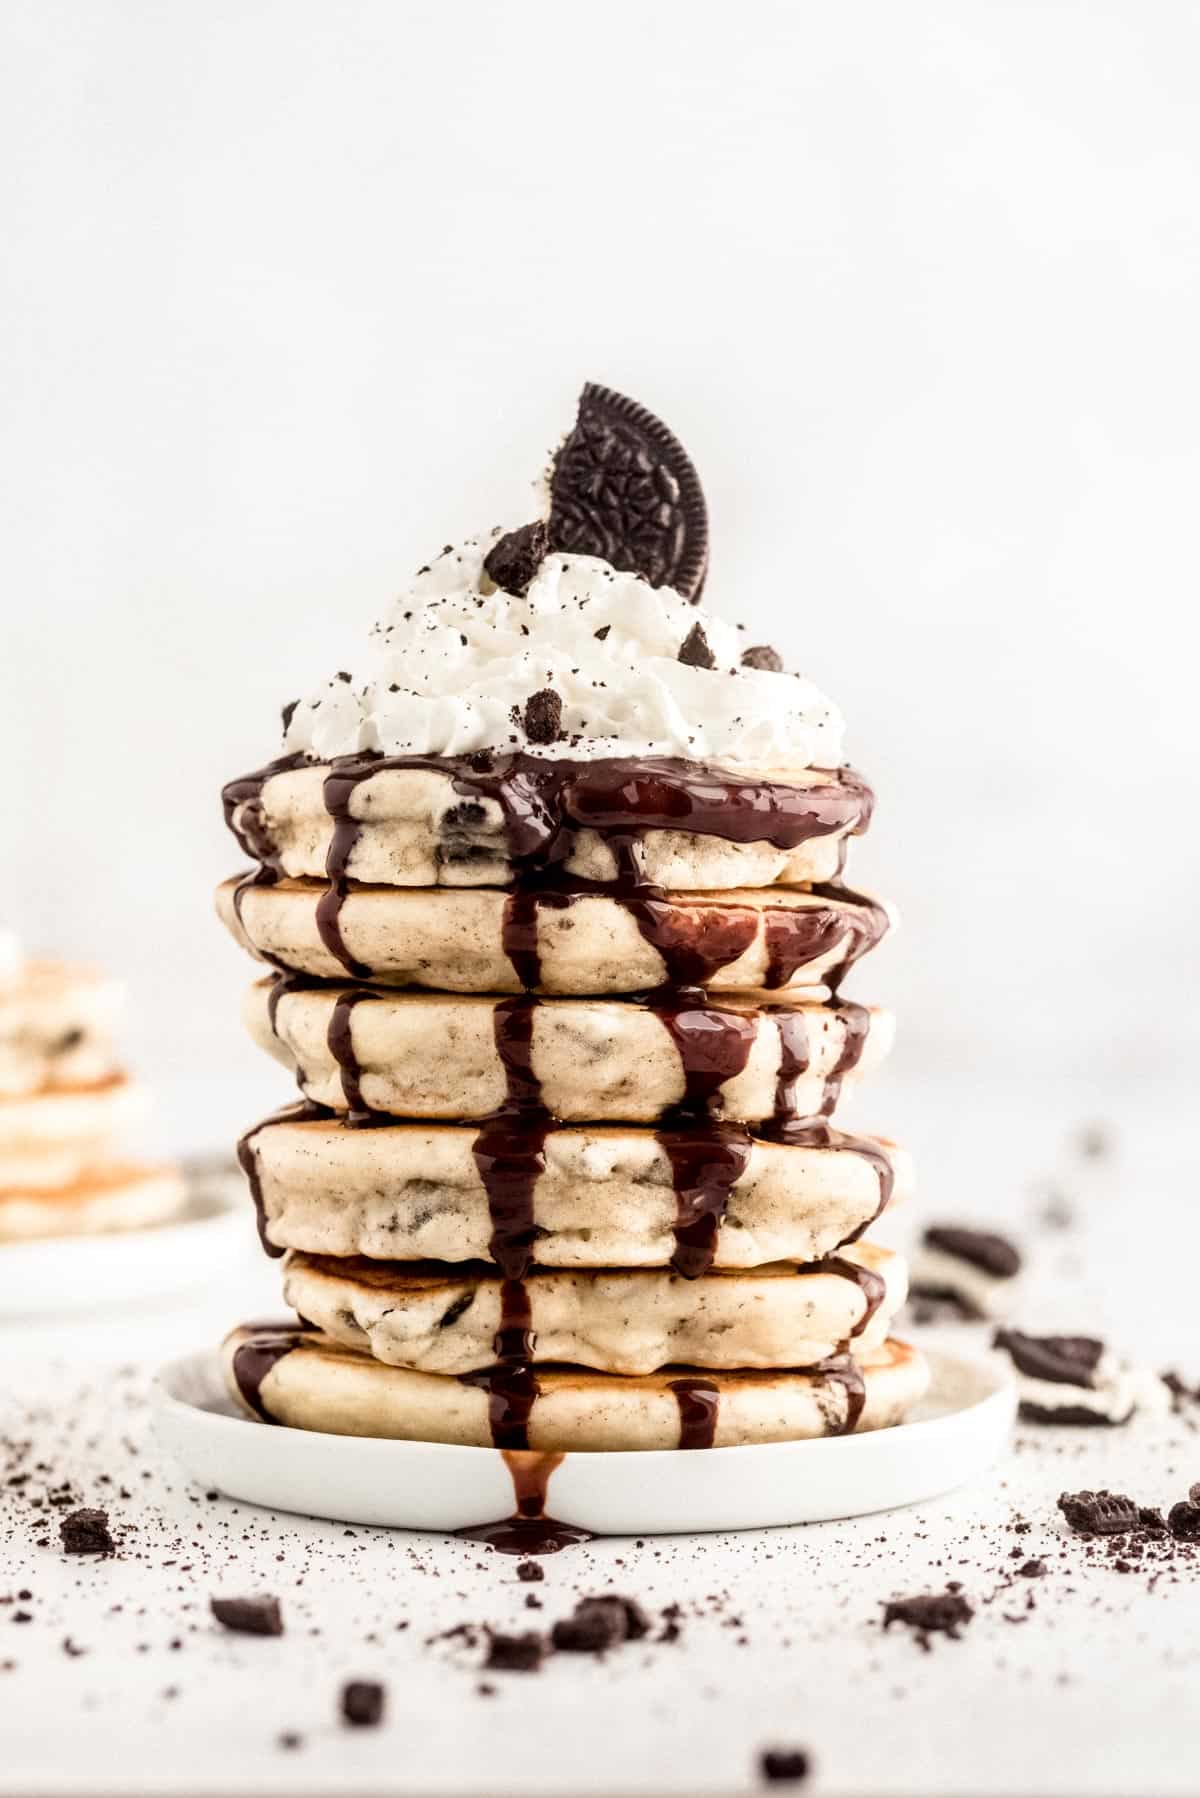 Tall stack of oreo pancakes topped with chocolate syrup, whipped cream, and crushed cookies.